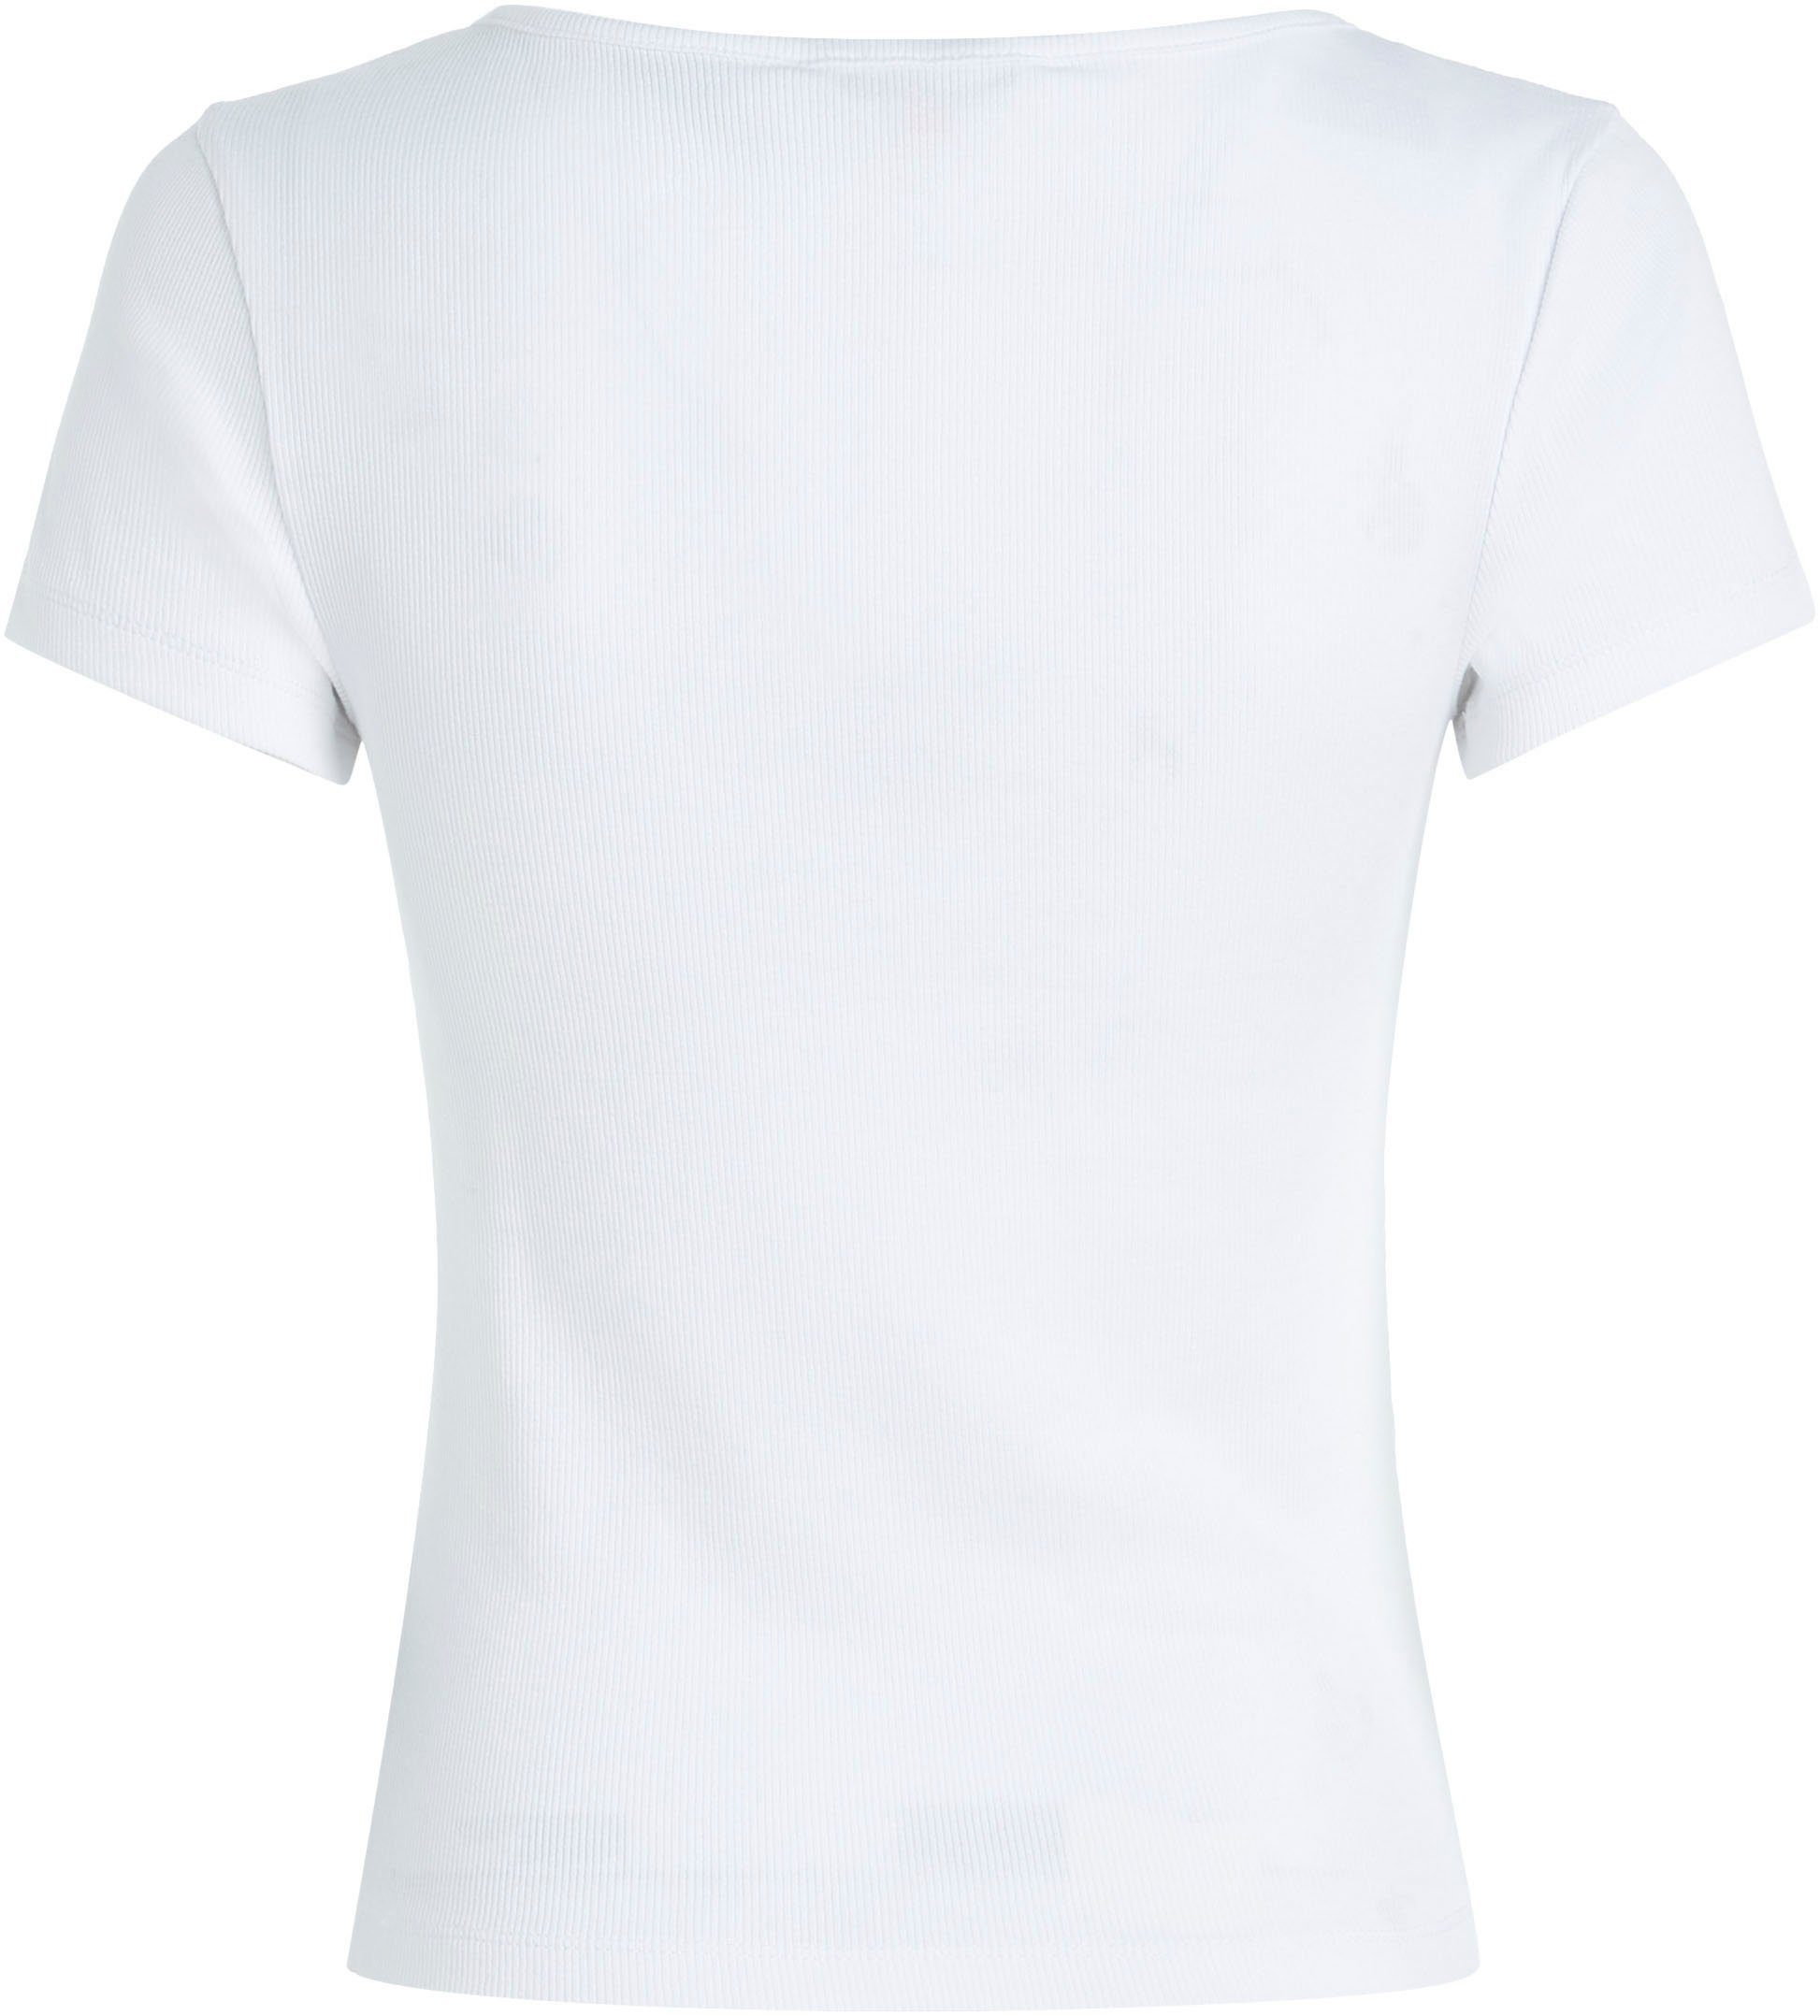 Tommy Jeans Jeans BBY mit C-NECK RIB BUTTON Logostickerei T-Shirt White TJW Tommy